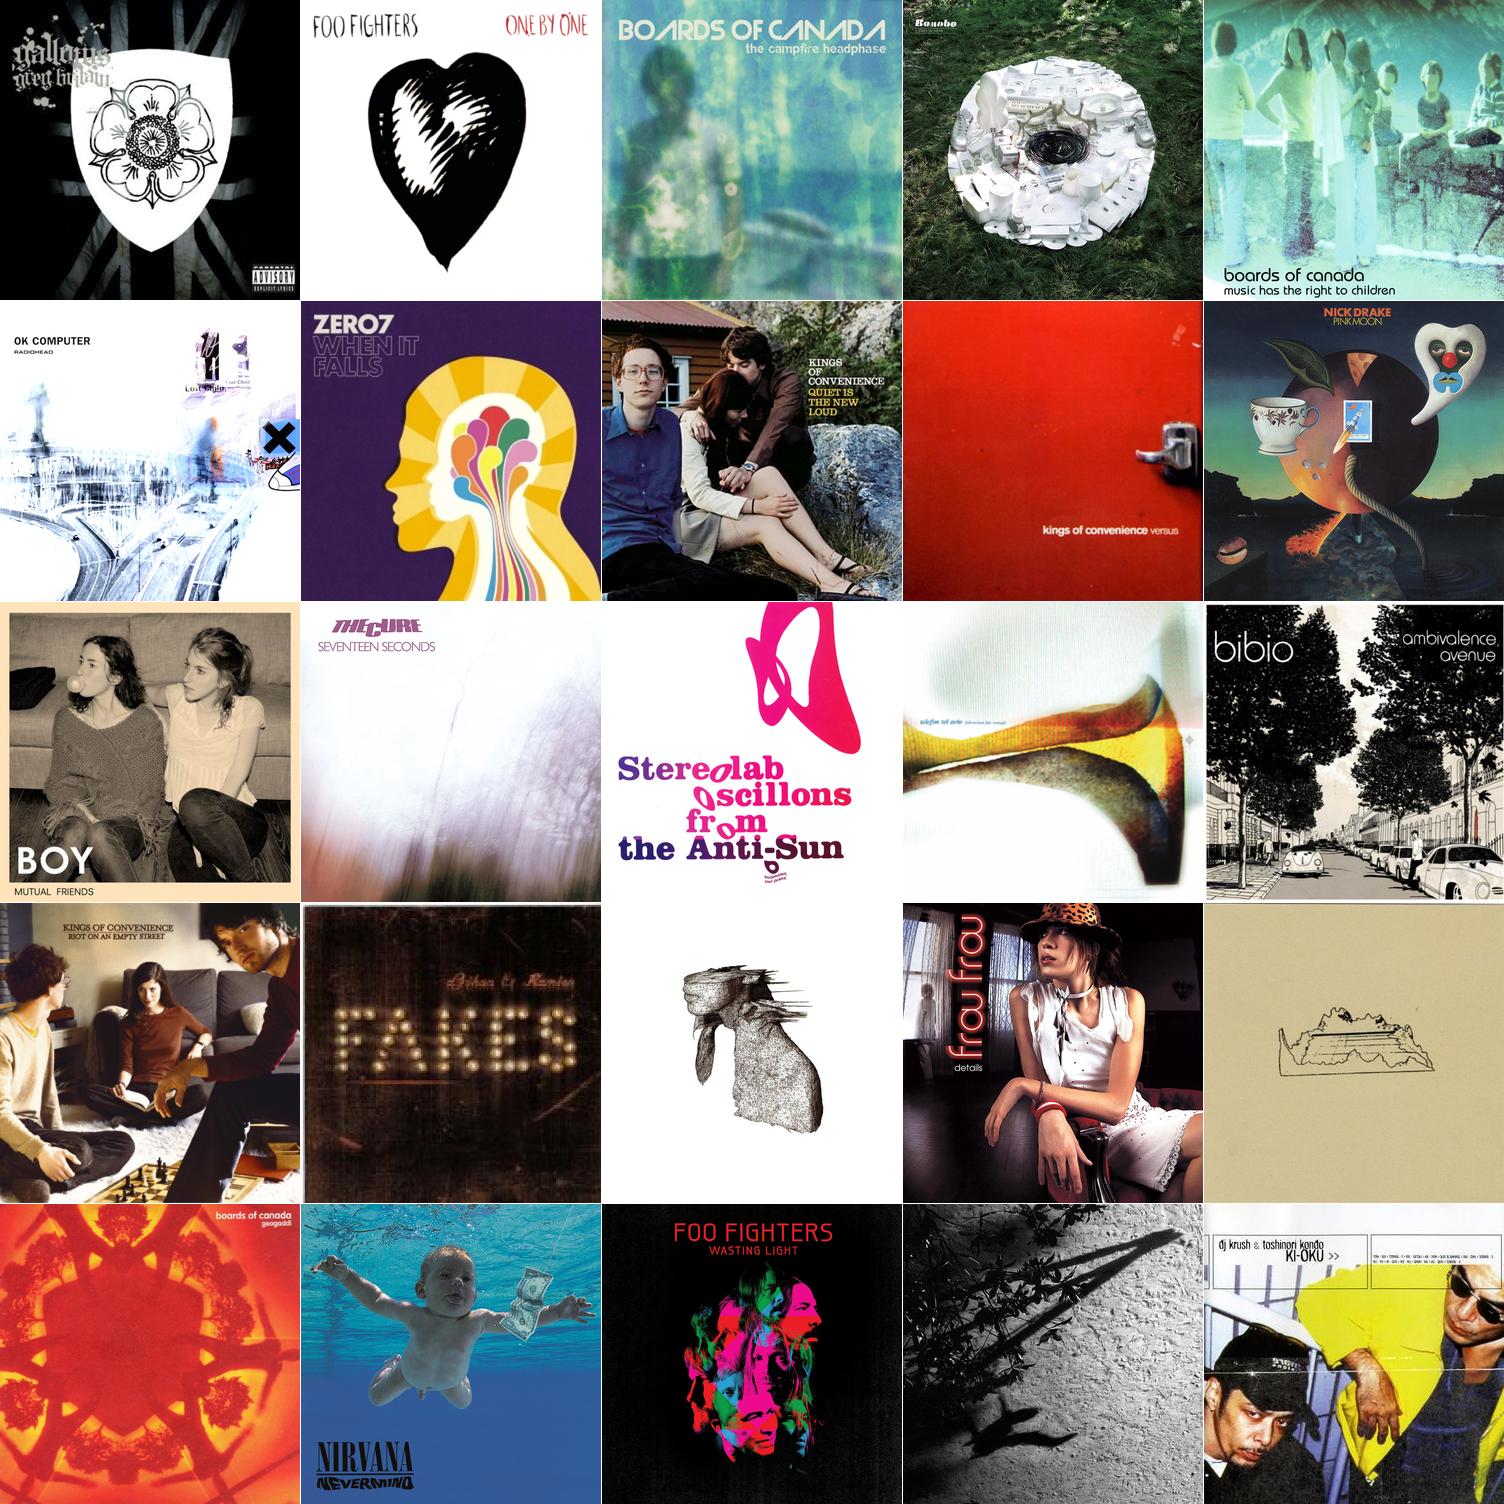 My 25 most listened albums of all time